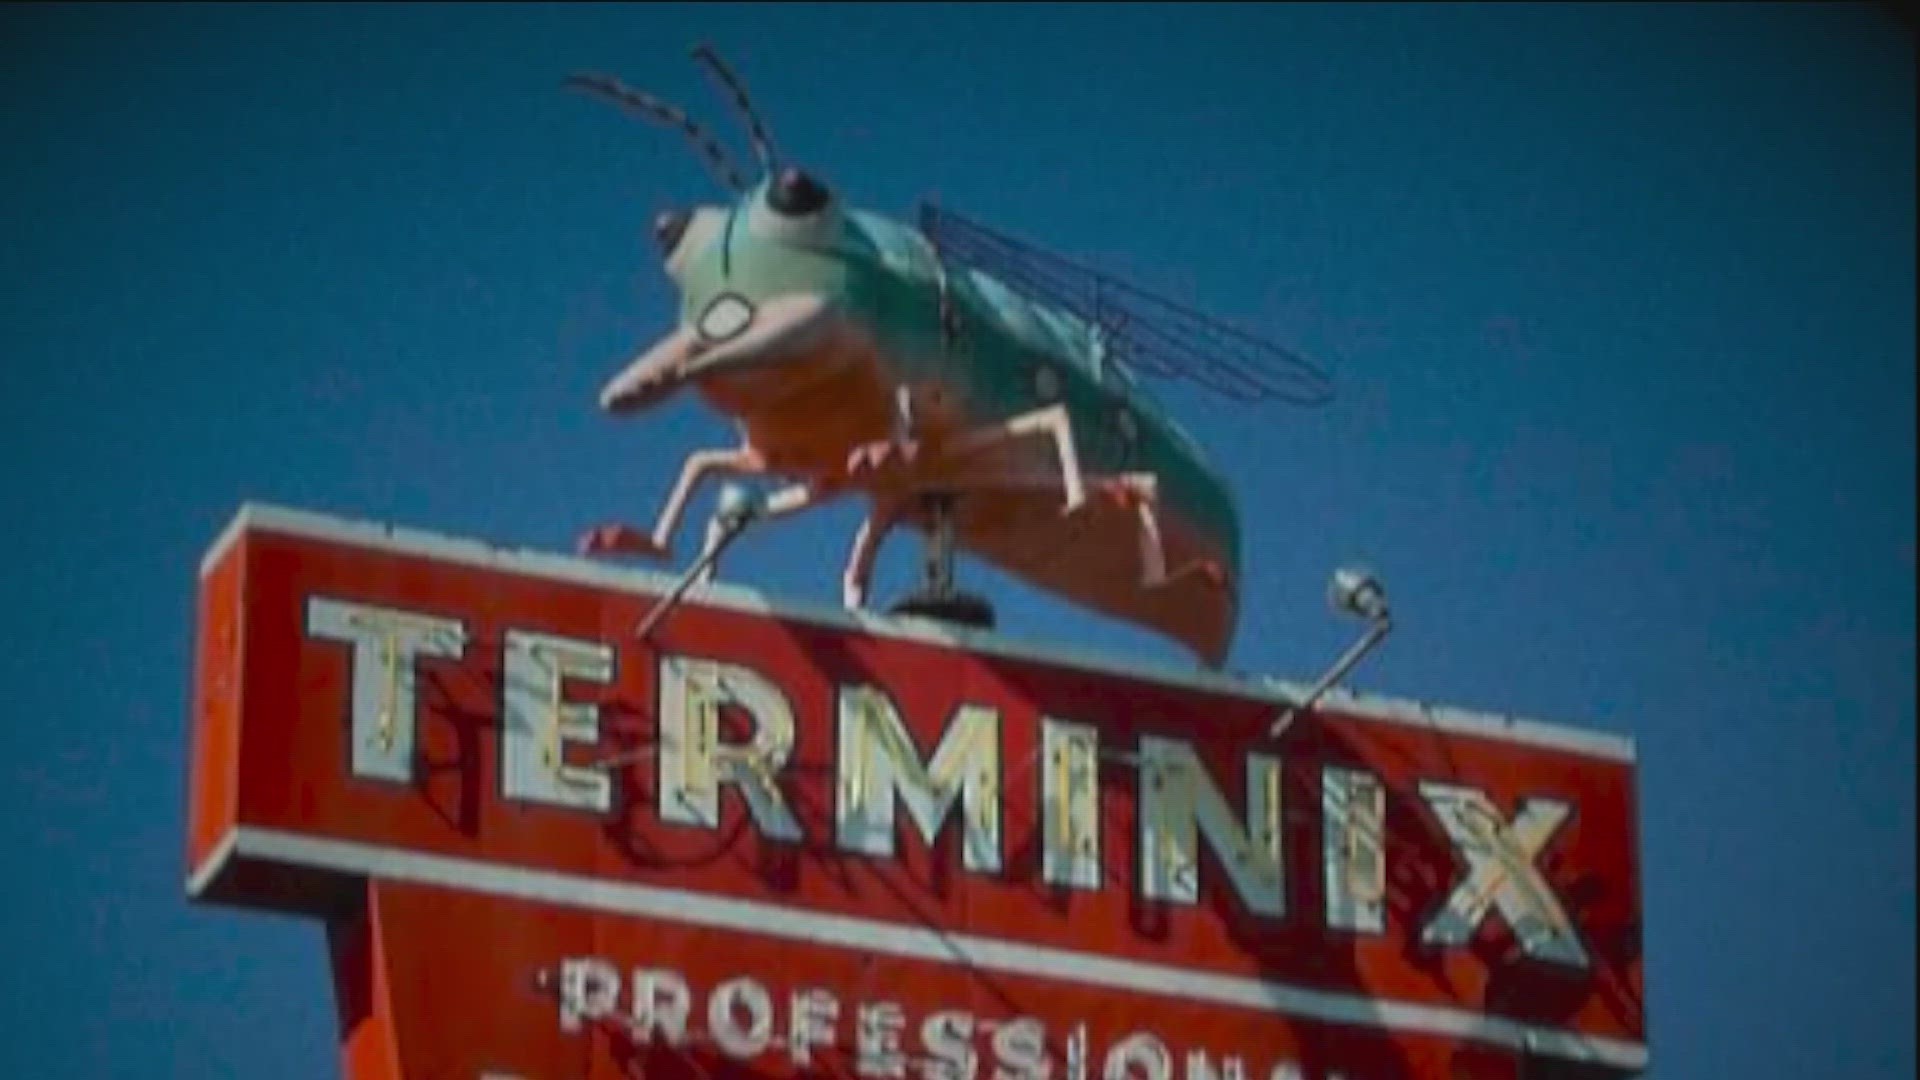 The famous Willie N. Festus bug was on top of a sign at a pest control business in Austin for years. KVUE went to find where he is now.